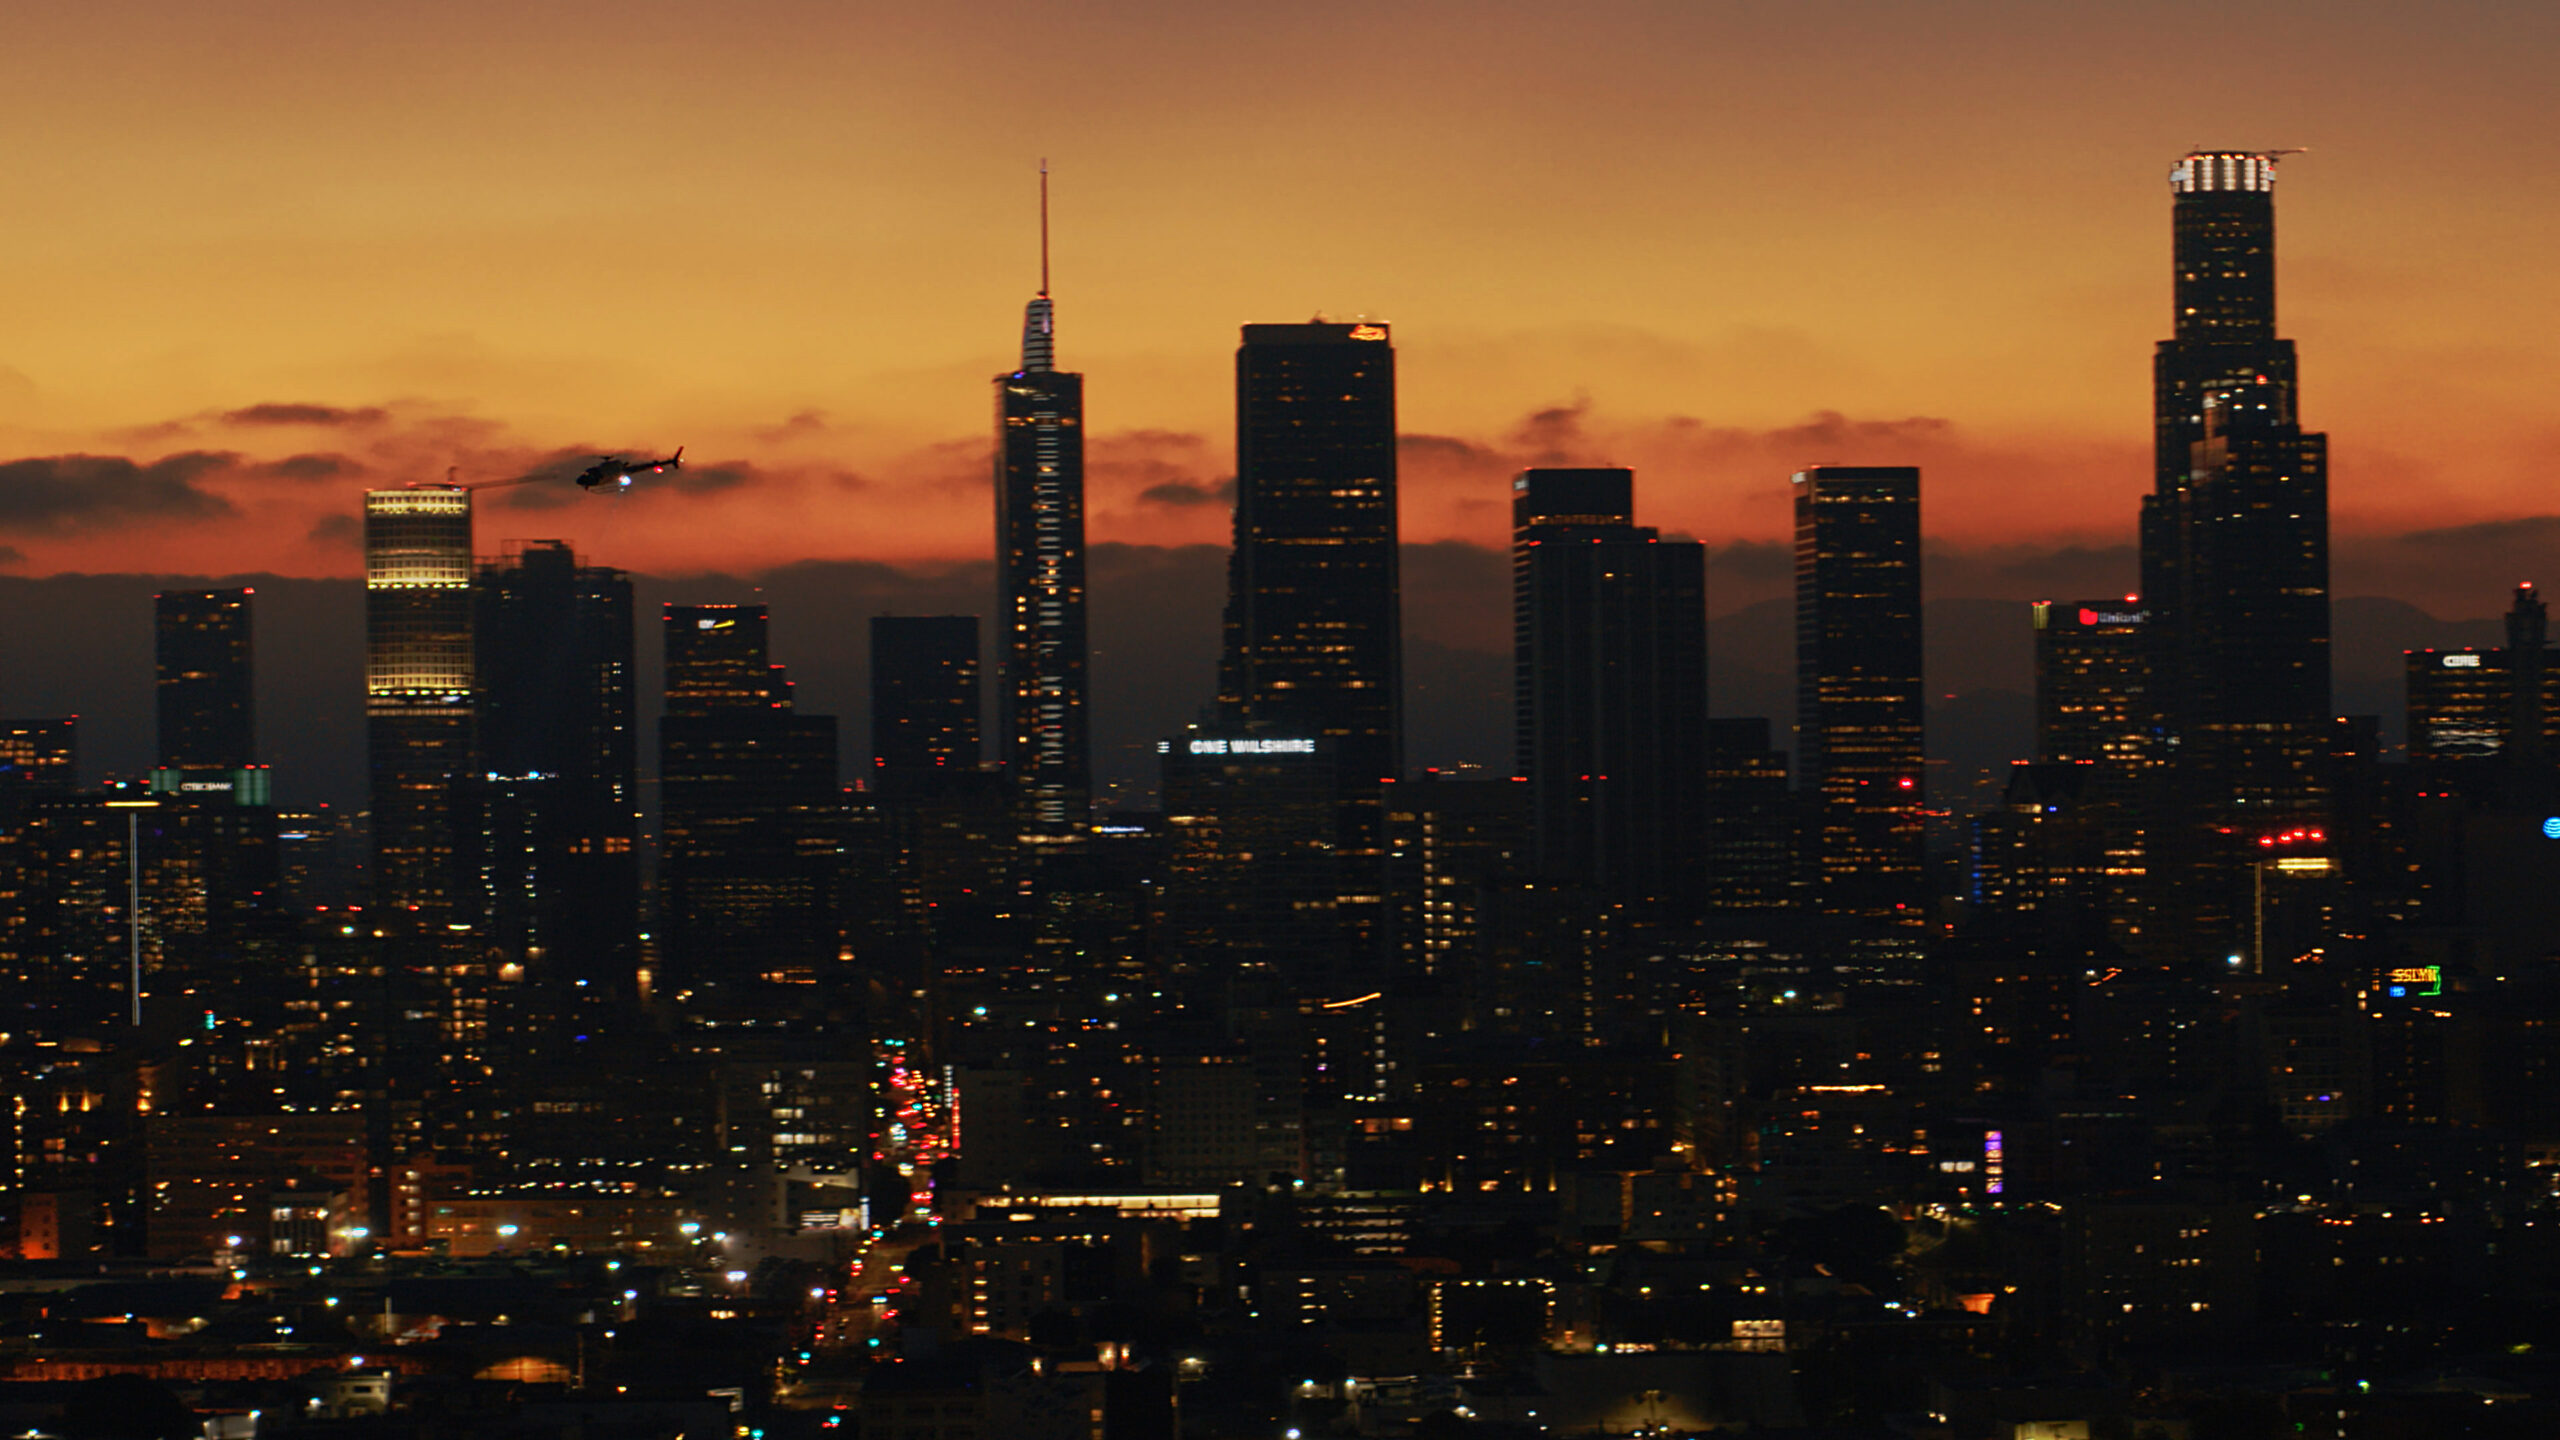 Police Department helicopter in pursuit over downtown Los Angeles at sunset, captured by AMK Films.